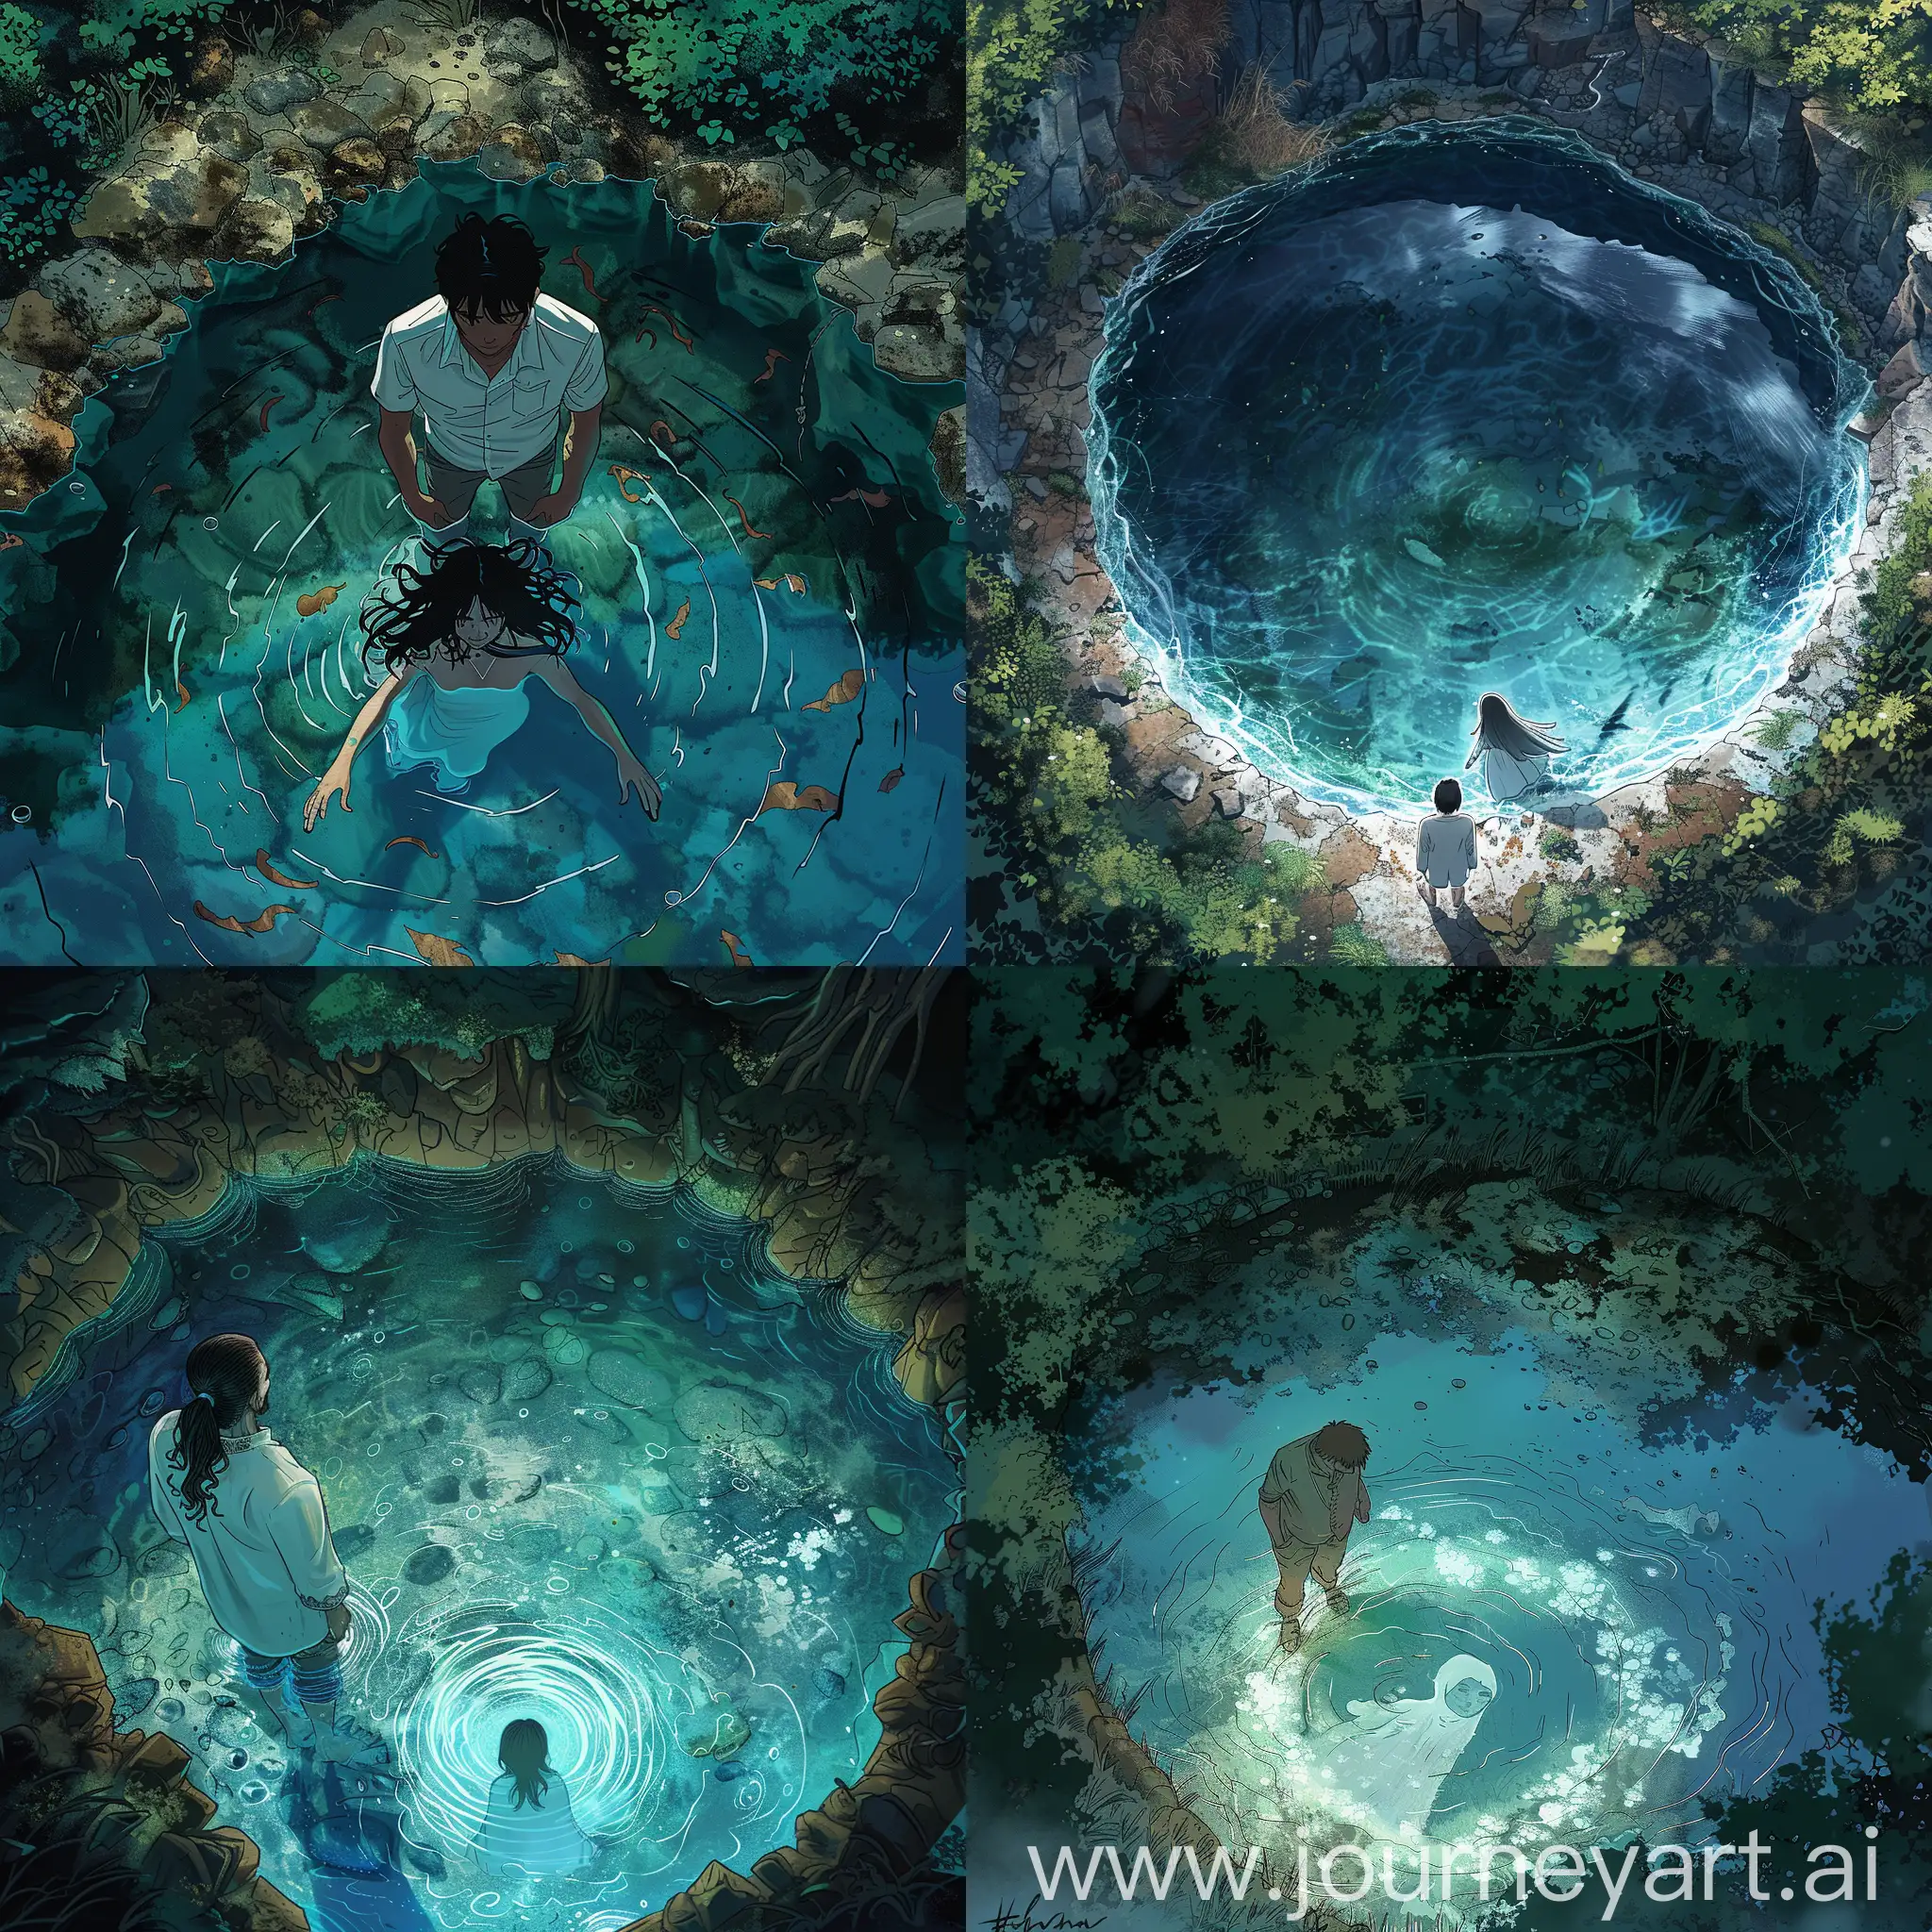 an story named "the enchanted lake", digital art, comic book, professional, a lake seen from above with a ghost girl under him